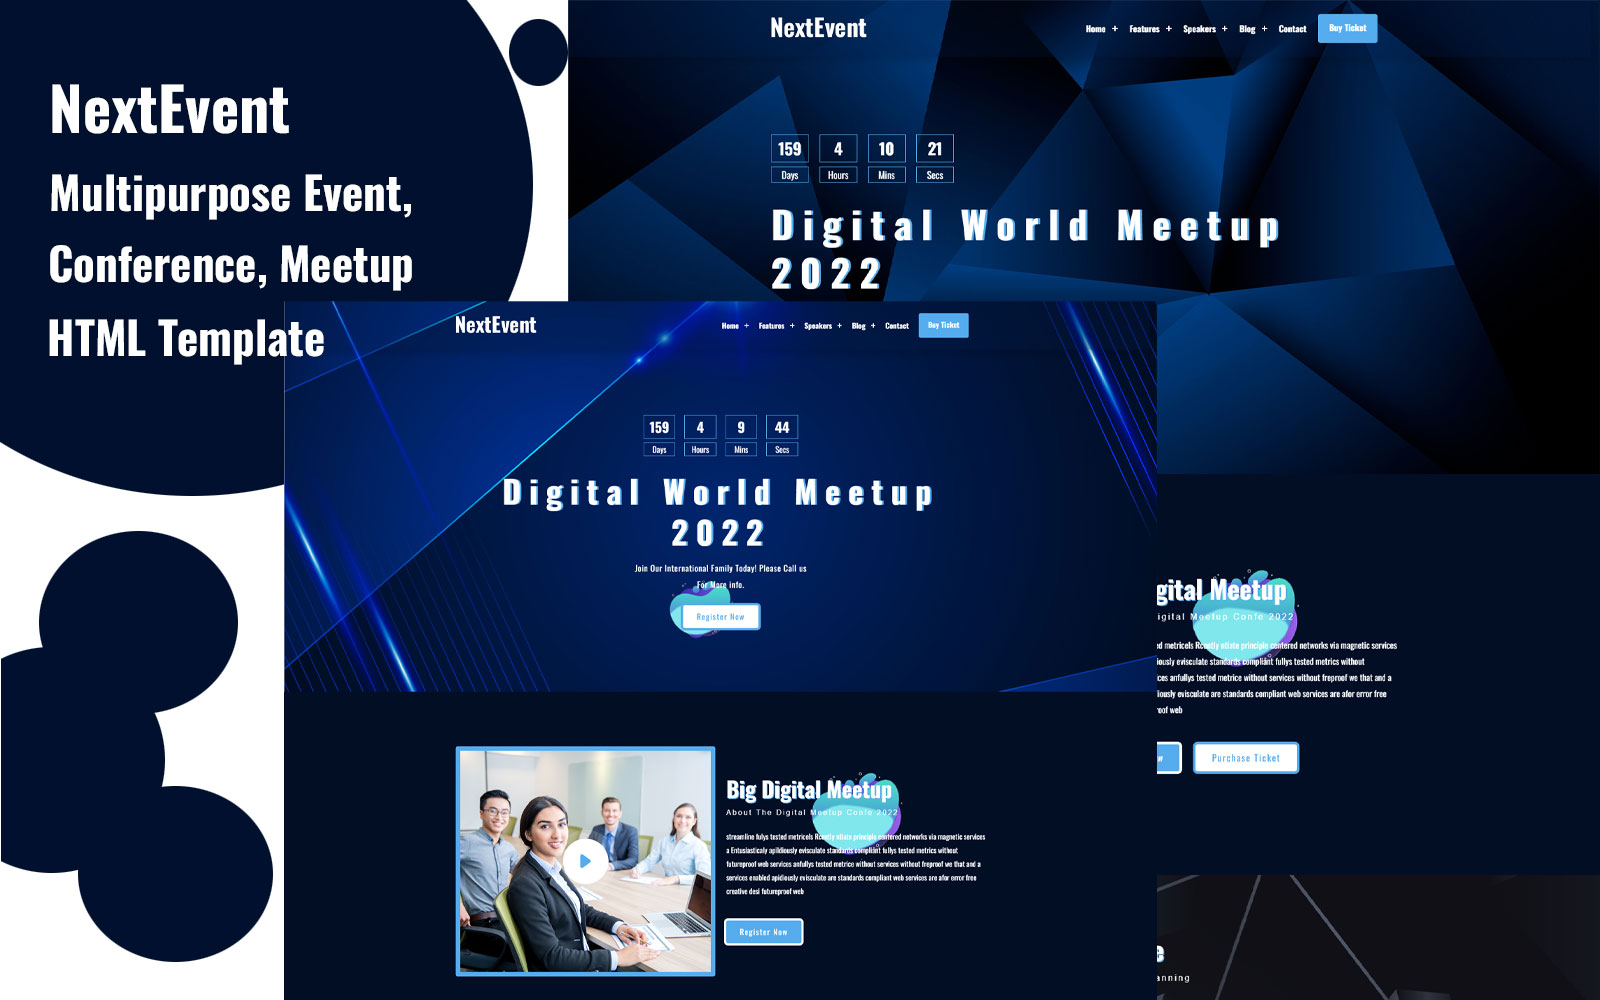 NextEvent - Multipurpose Event, Conference, Meetup HTML Template